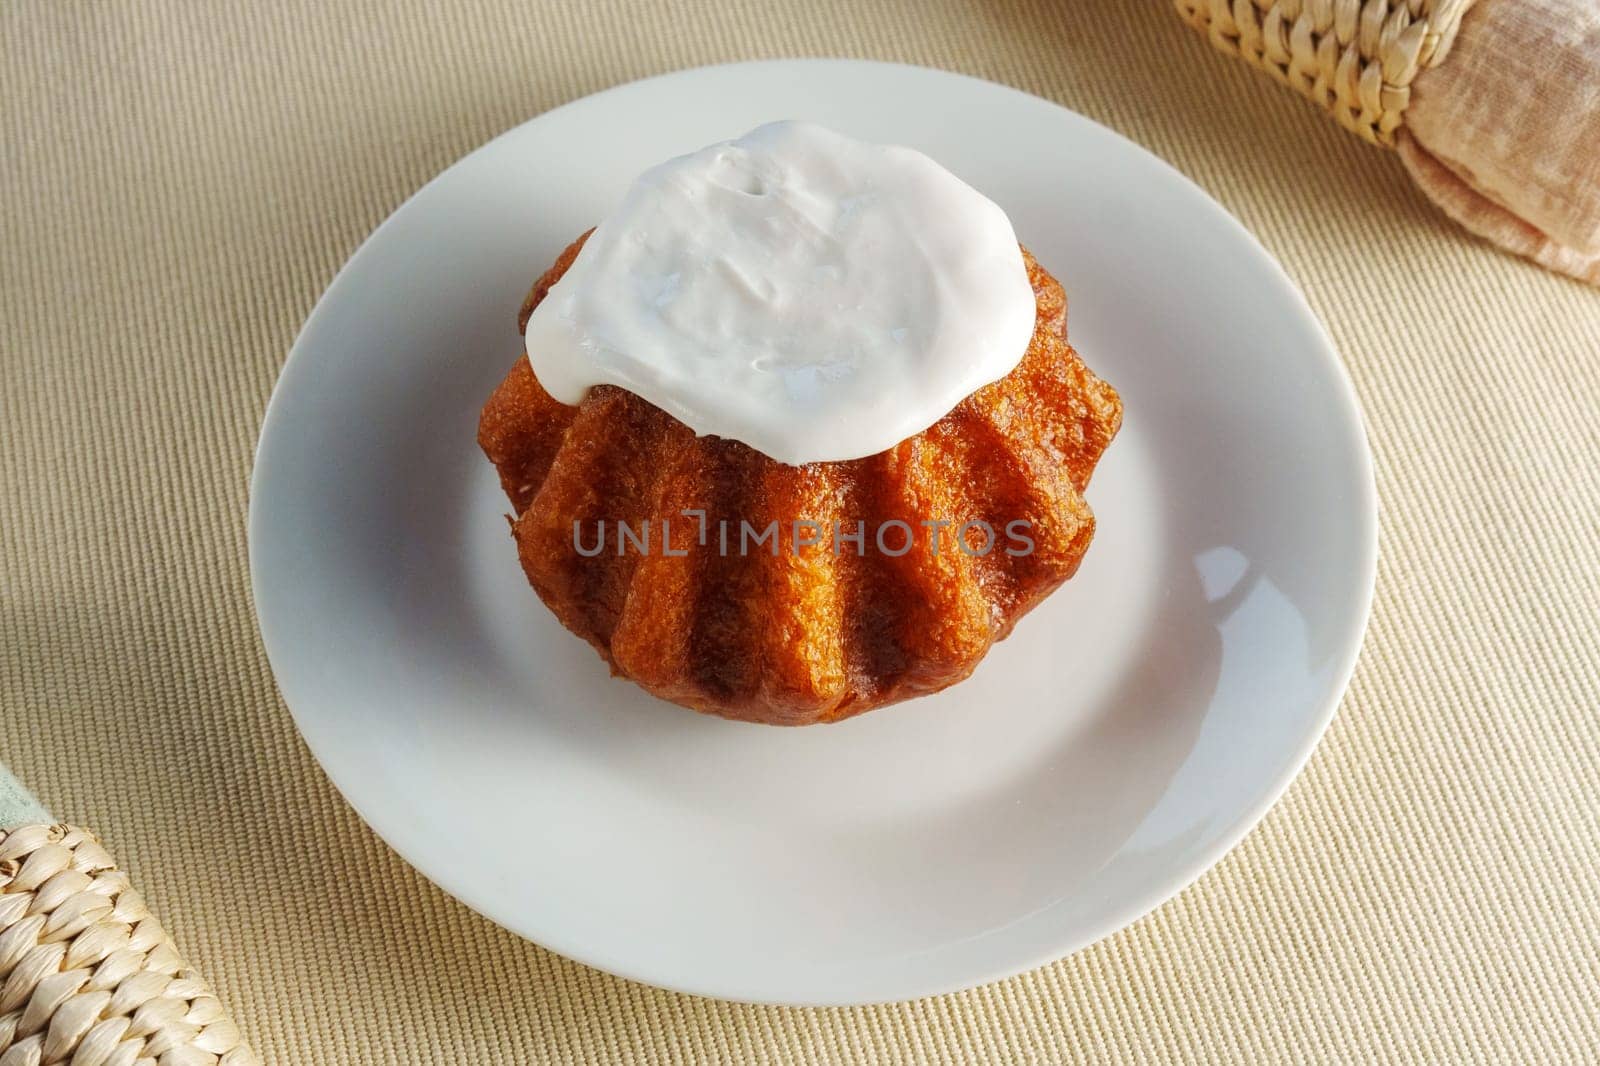 A tantalizing cupcake sits on a delicate plate, adorned with a fluffy mountain of whipped cream topping. by darksoul72